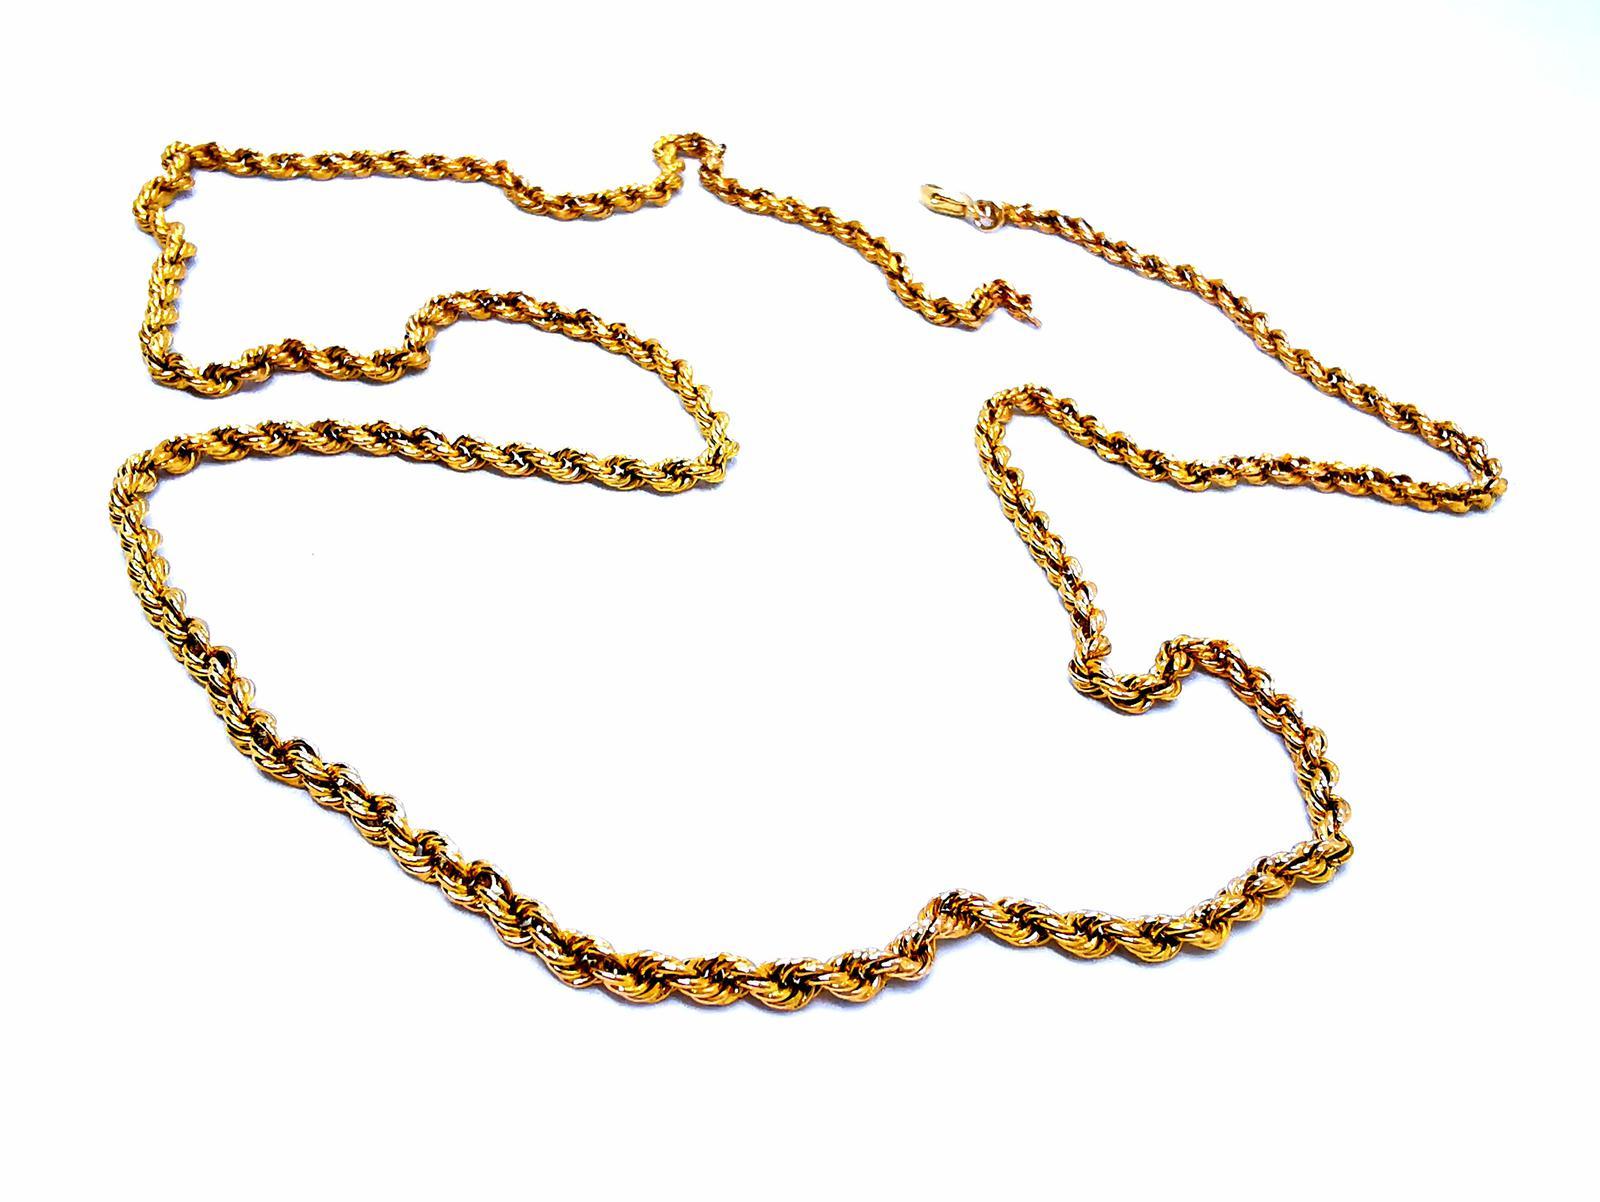 Gold necklace yellow 750 mils (18 carats). jumper mesh twisted rope. length: 76 cm. width: 0.33 cm. total weight: 18.29 g. punch eagle's head. excellent condition
